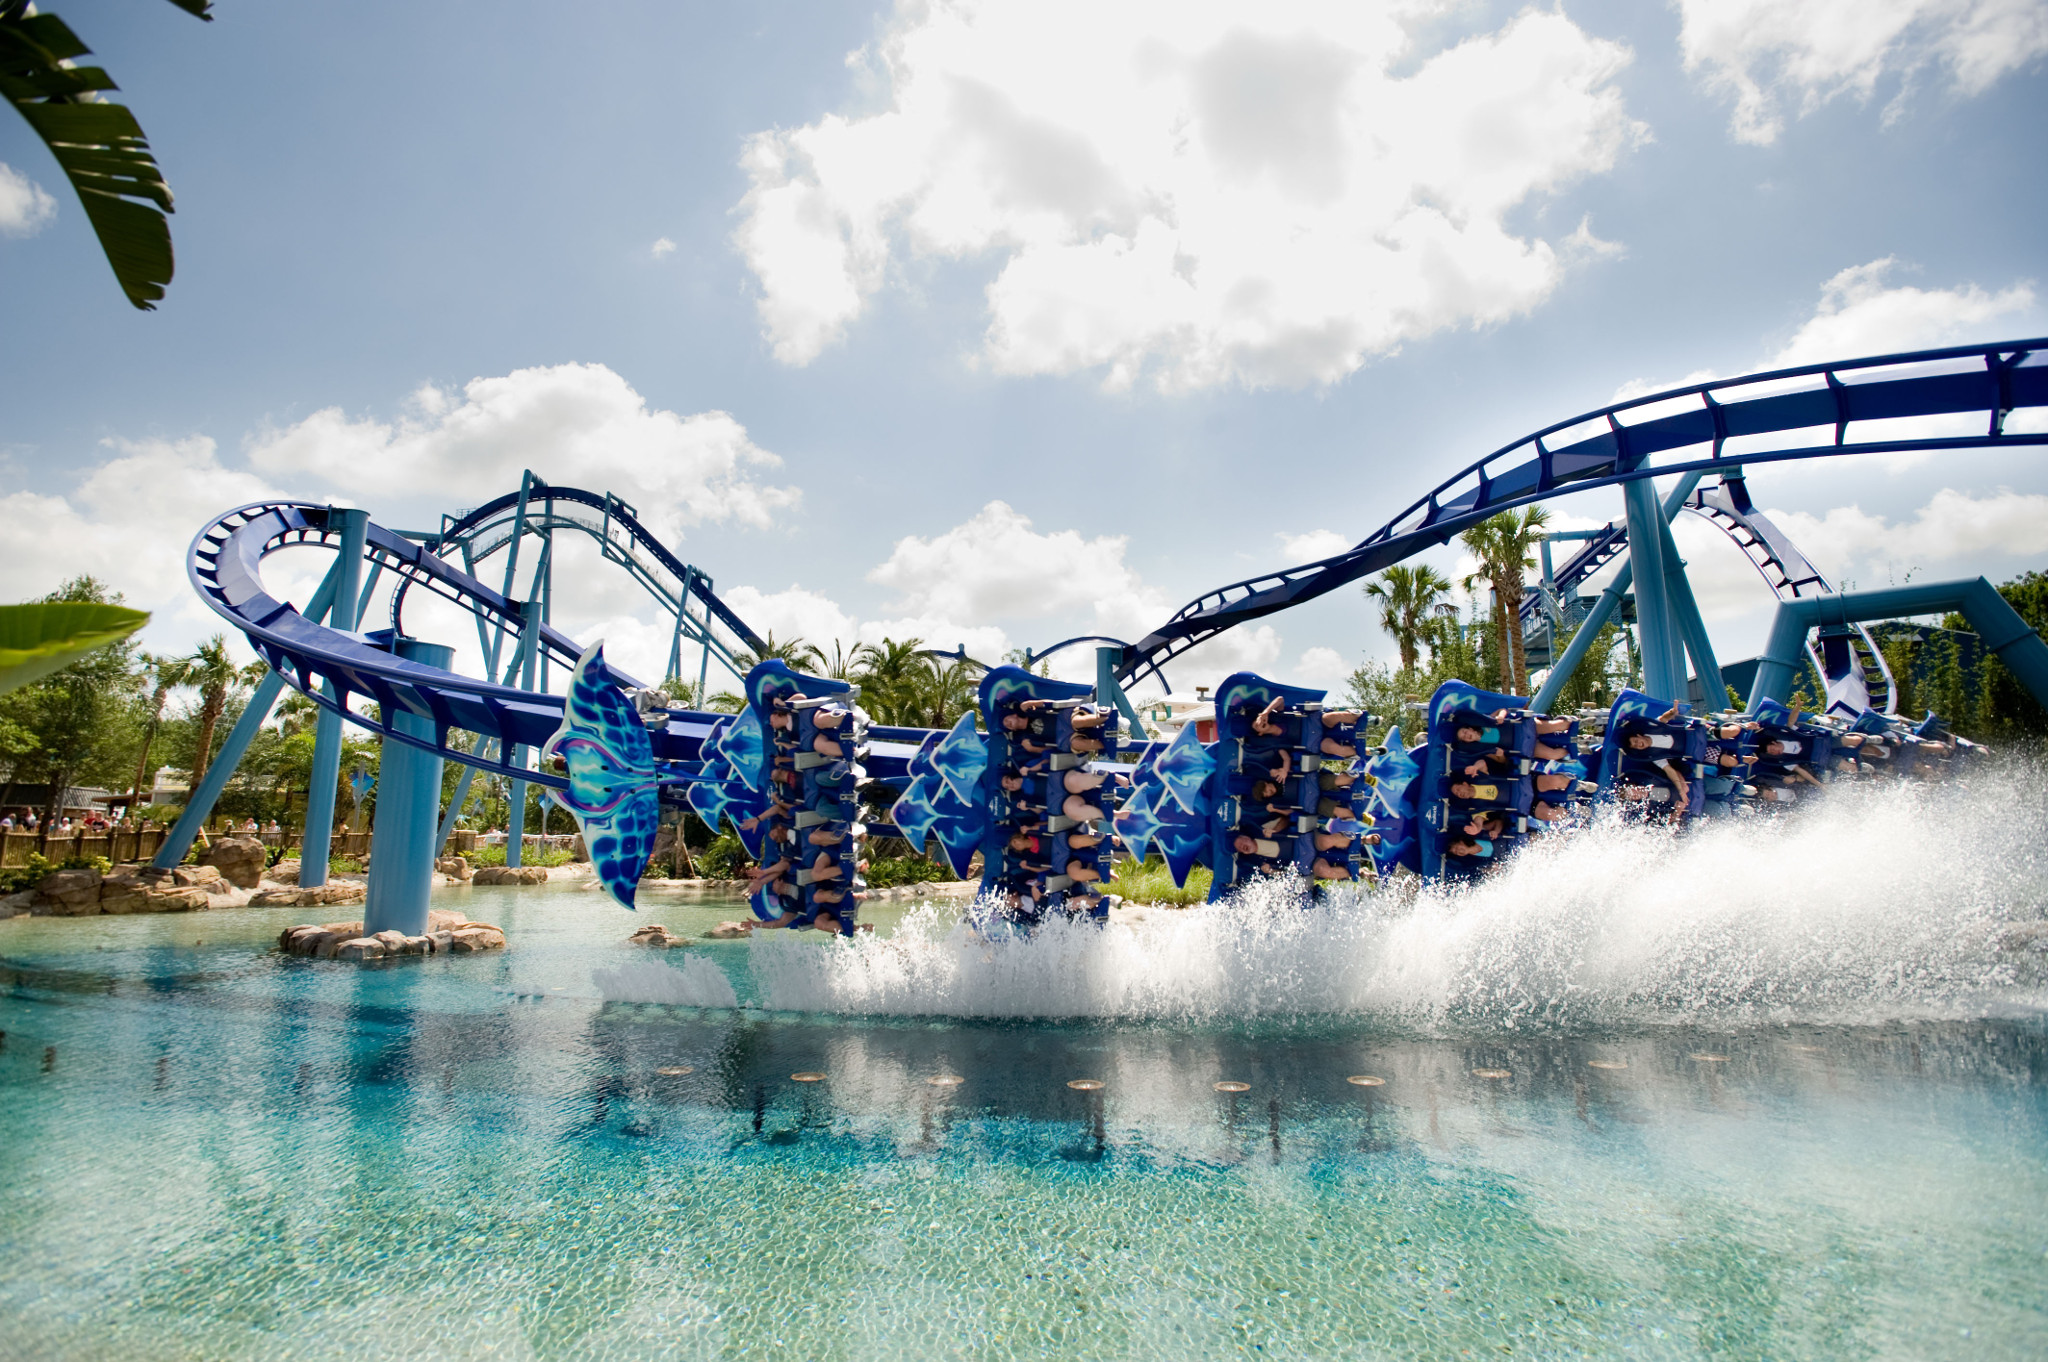 SeaWorld Orlando just announced a limited-time flash sale on park tickets